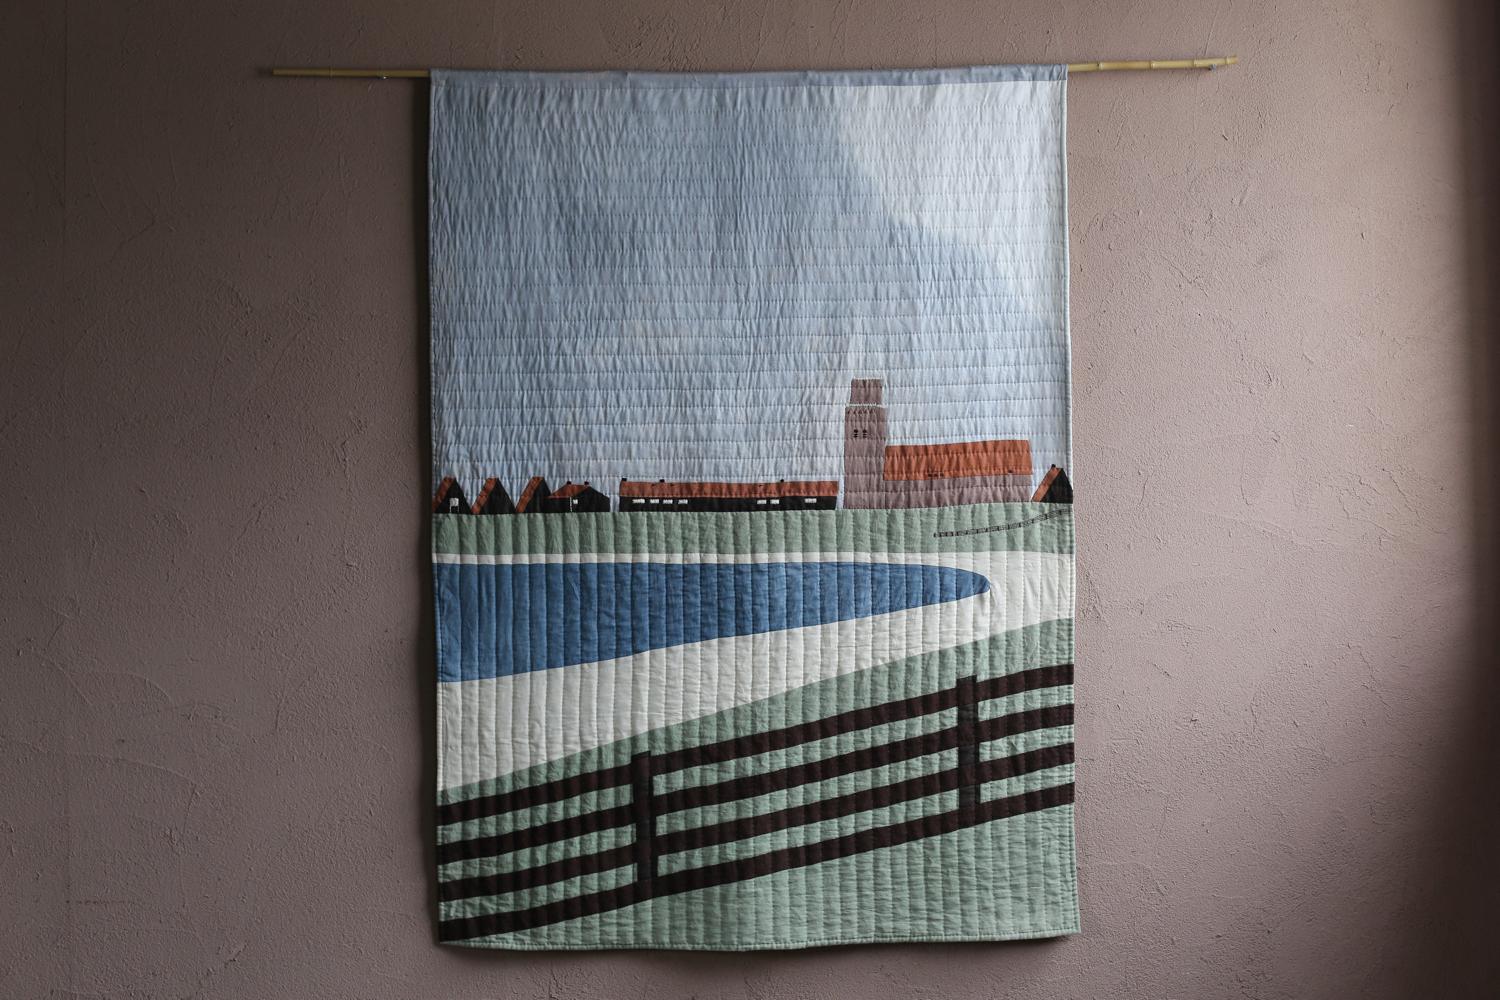 Title : Landscape
Japan / 2022s
Size : W 1300 H 1800 mm

This quilt is made with woven fresh linen and French linen.
Hand quilted with cotton thread.
Partially hand-embroidered.
Hand dyed with chinese sumac, logwood, tingi (A kind of bark of